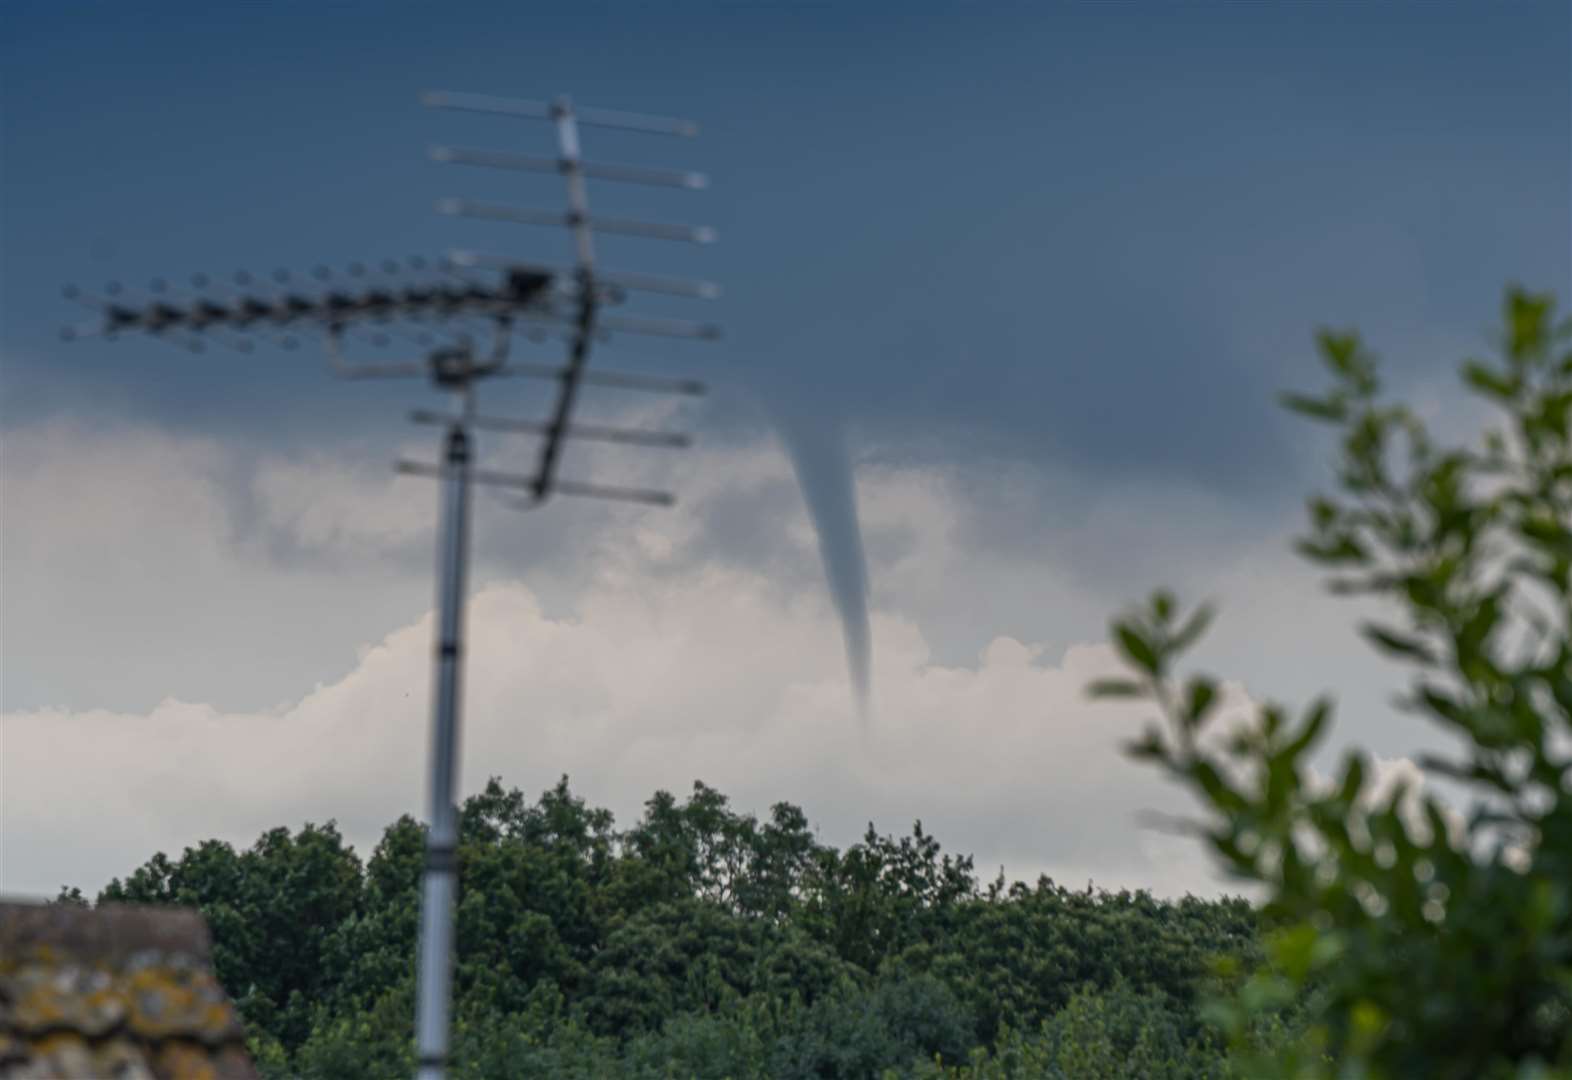 Funnel cloud forms close to motorway